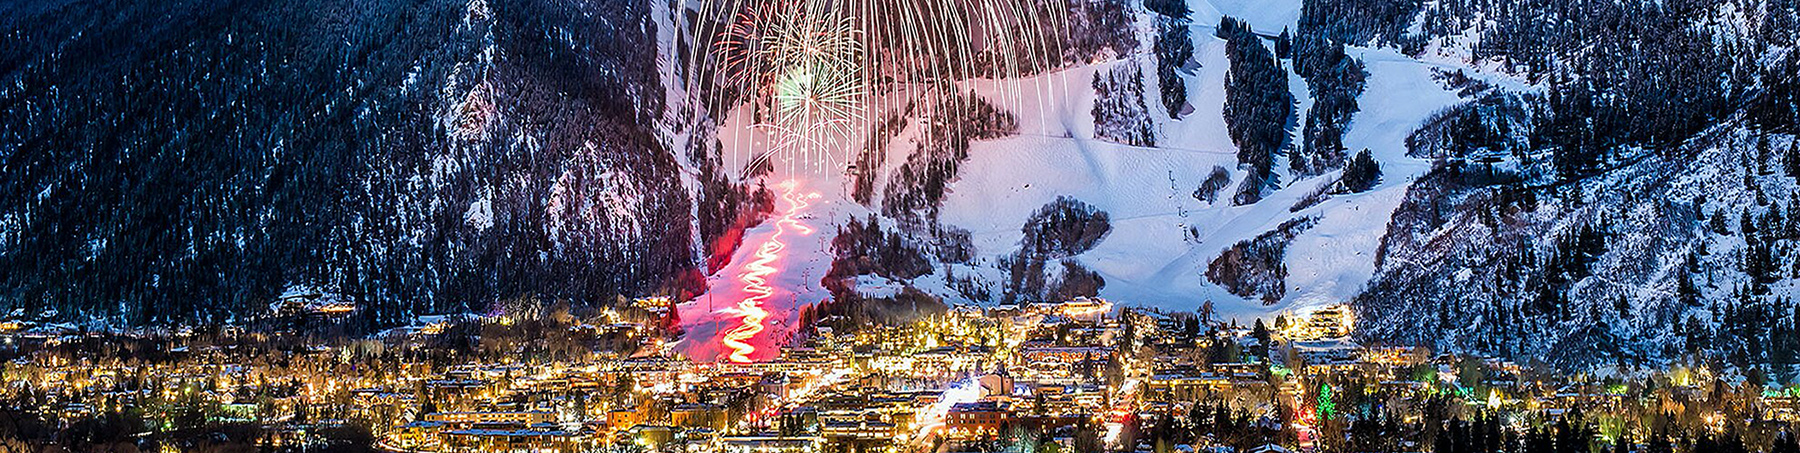 Fireworks are just one of the spectacles celebrating winter on Ajax Mountain in Aspen